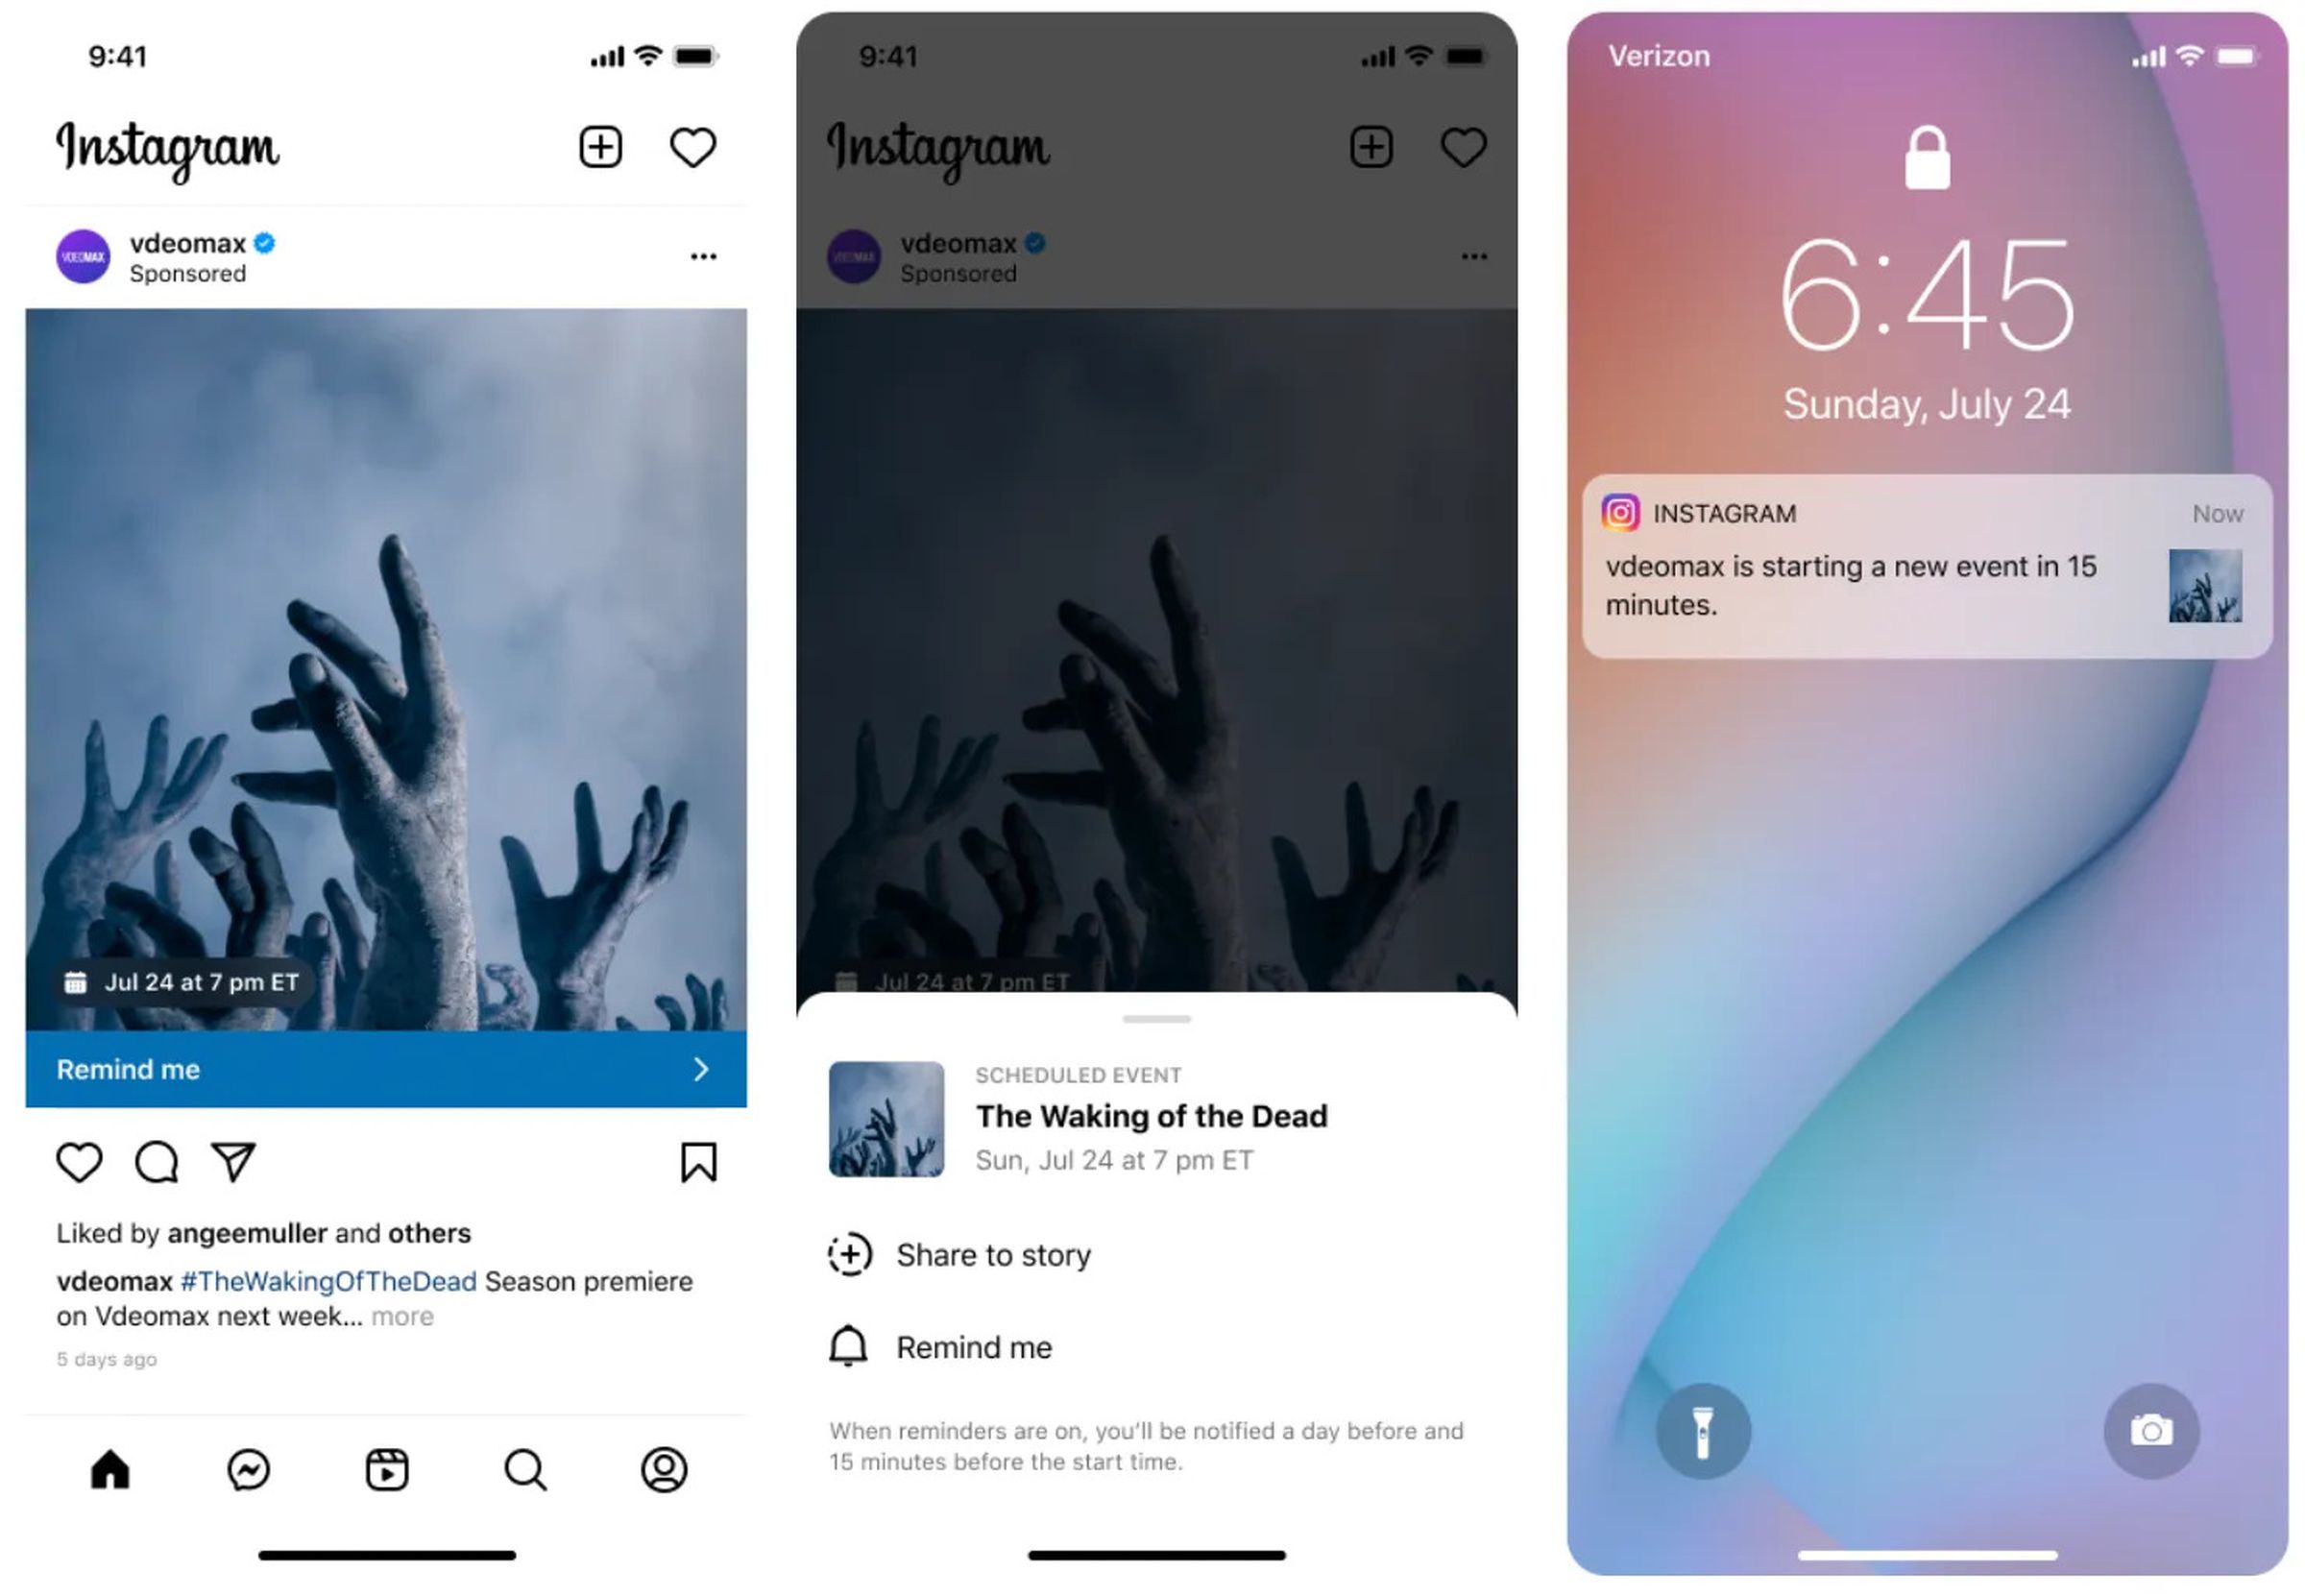 Here’s what Instagram’s “reminder” ads will look like.